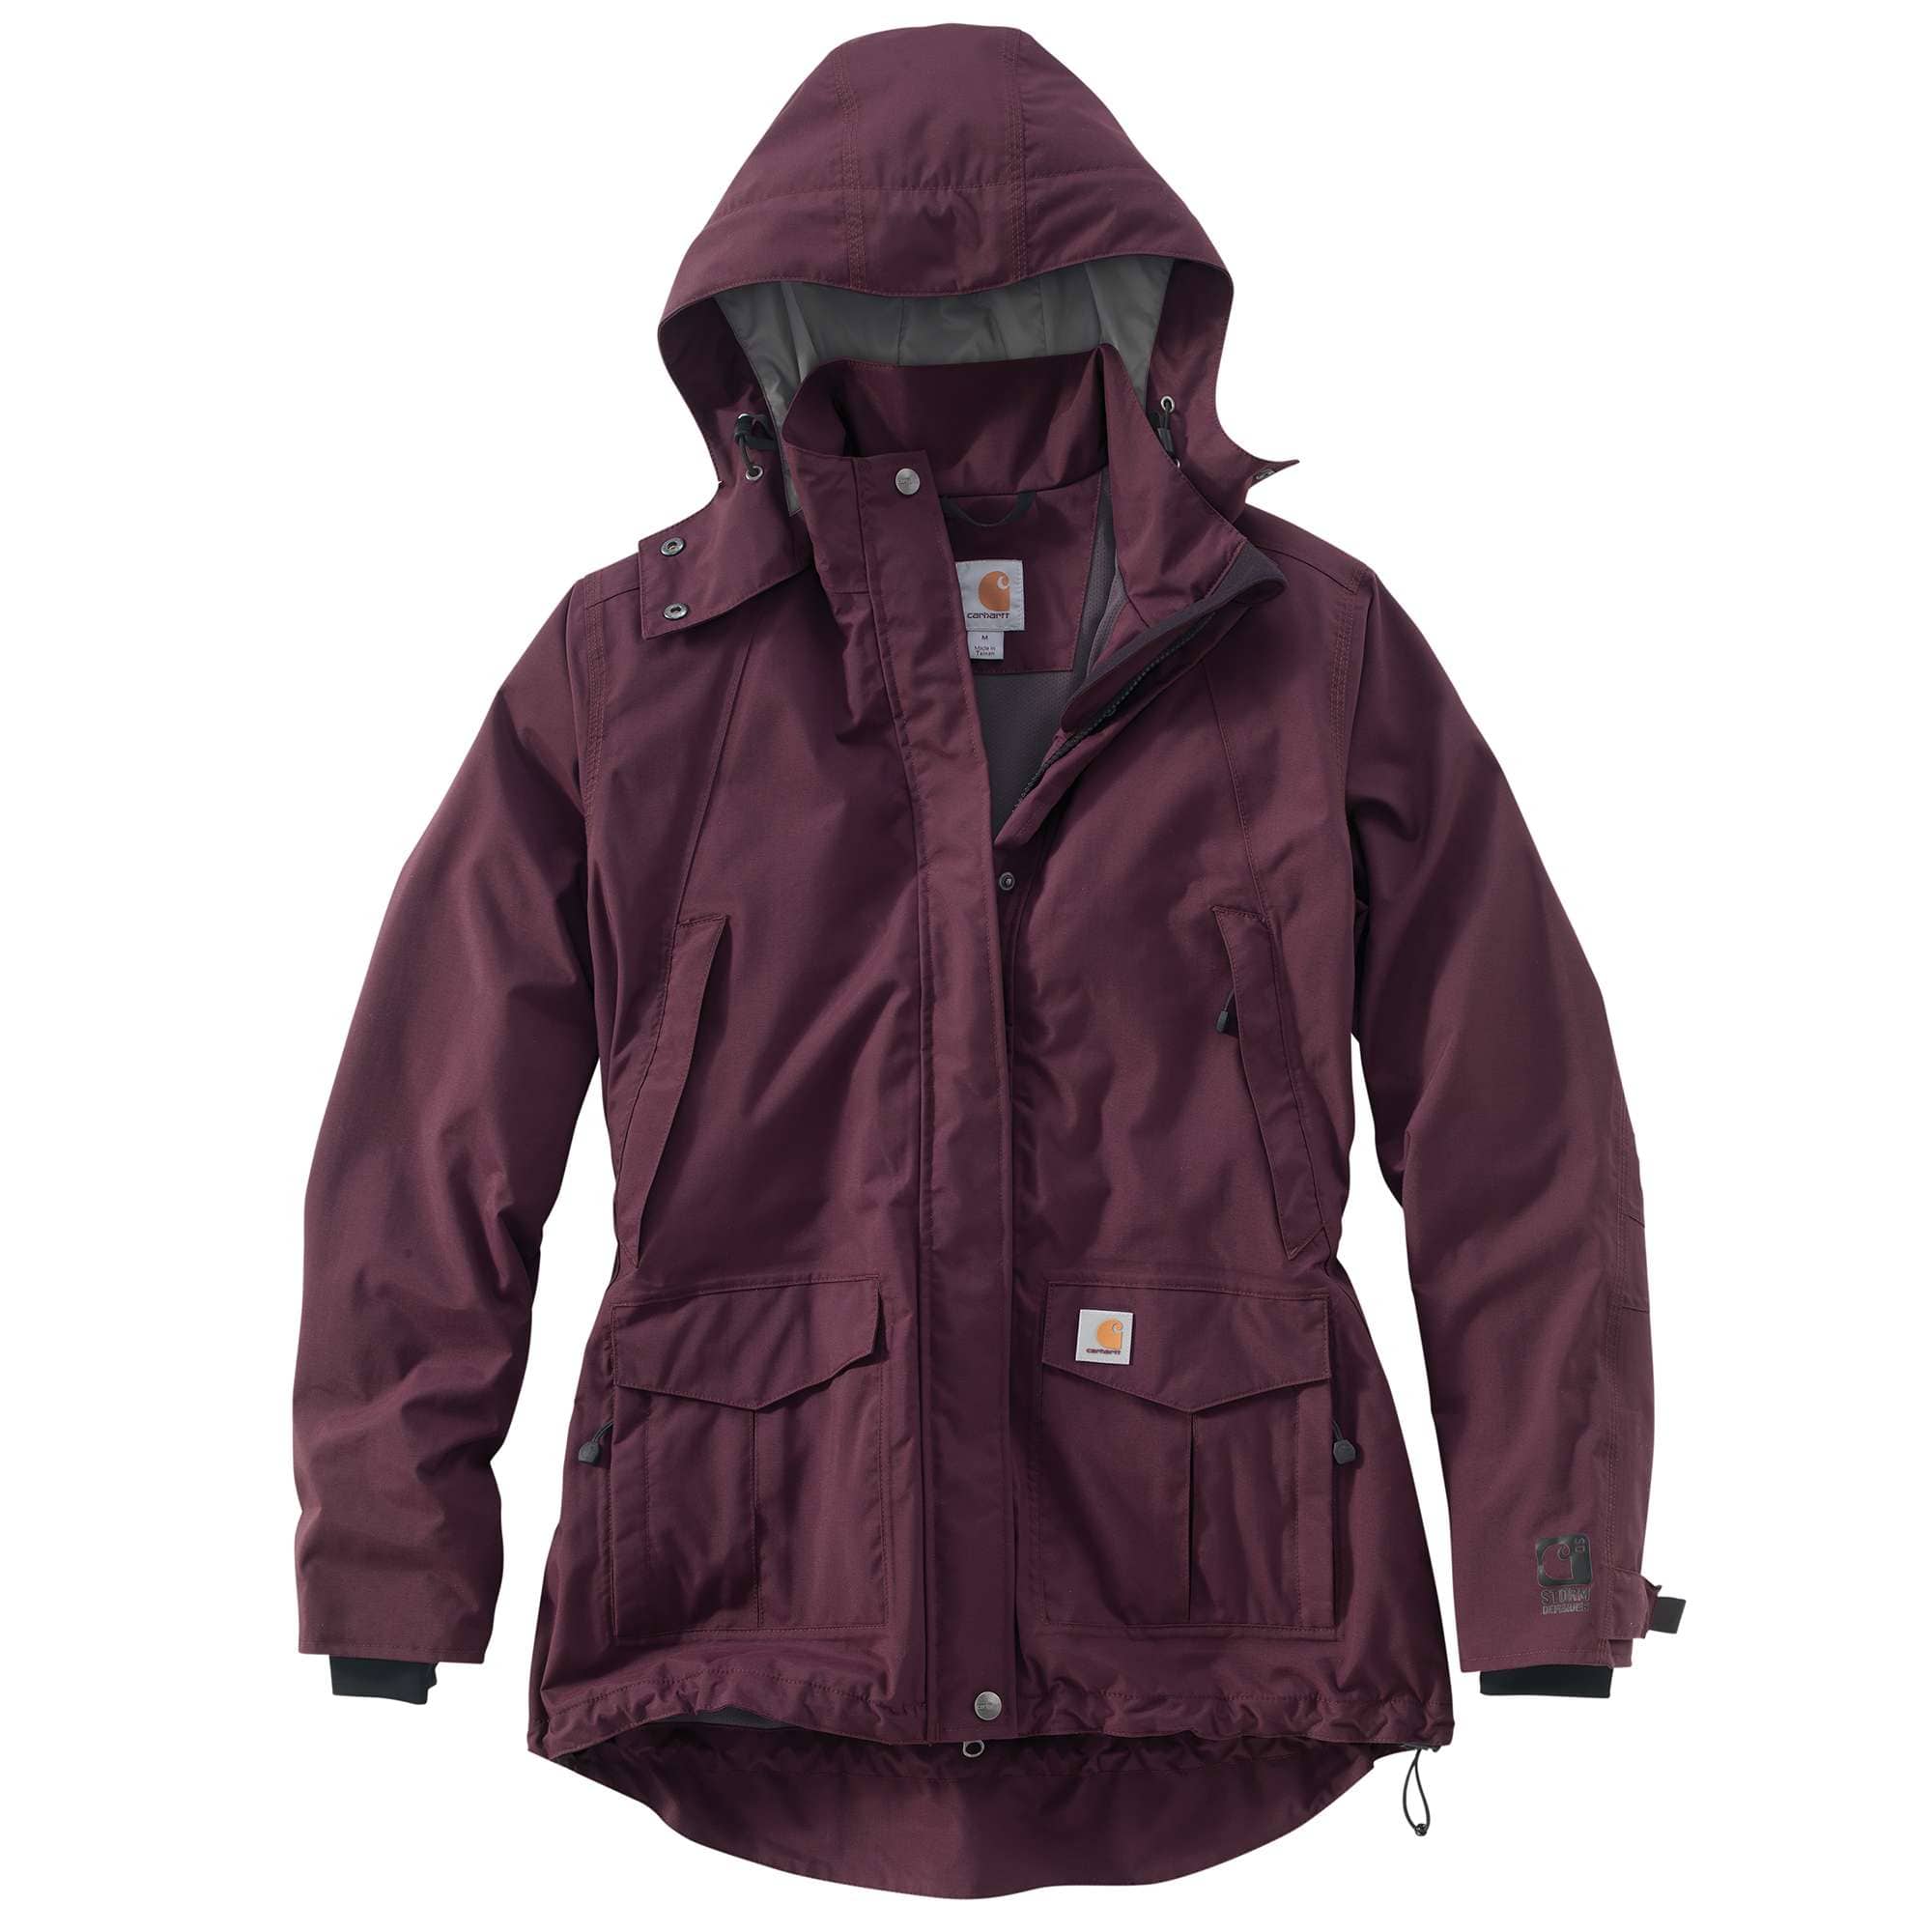 carhartt ski jacket women's - OFF-64% >Free Delivery